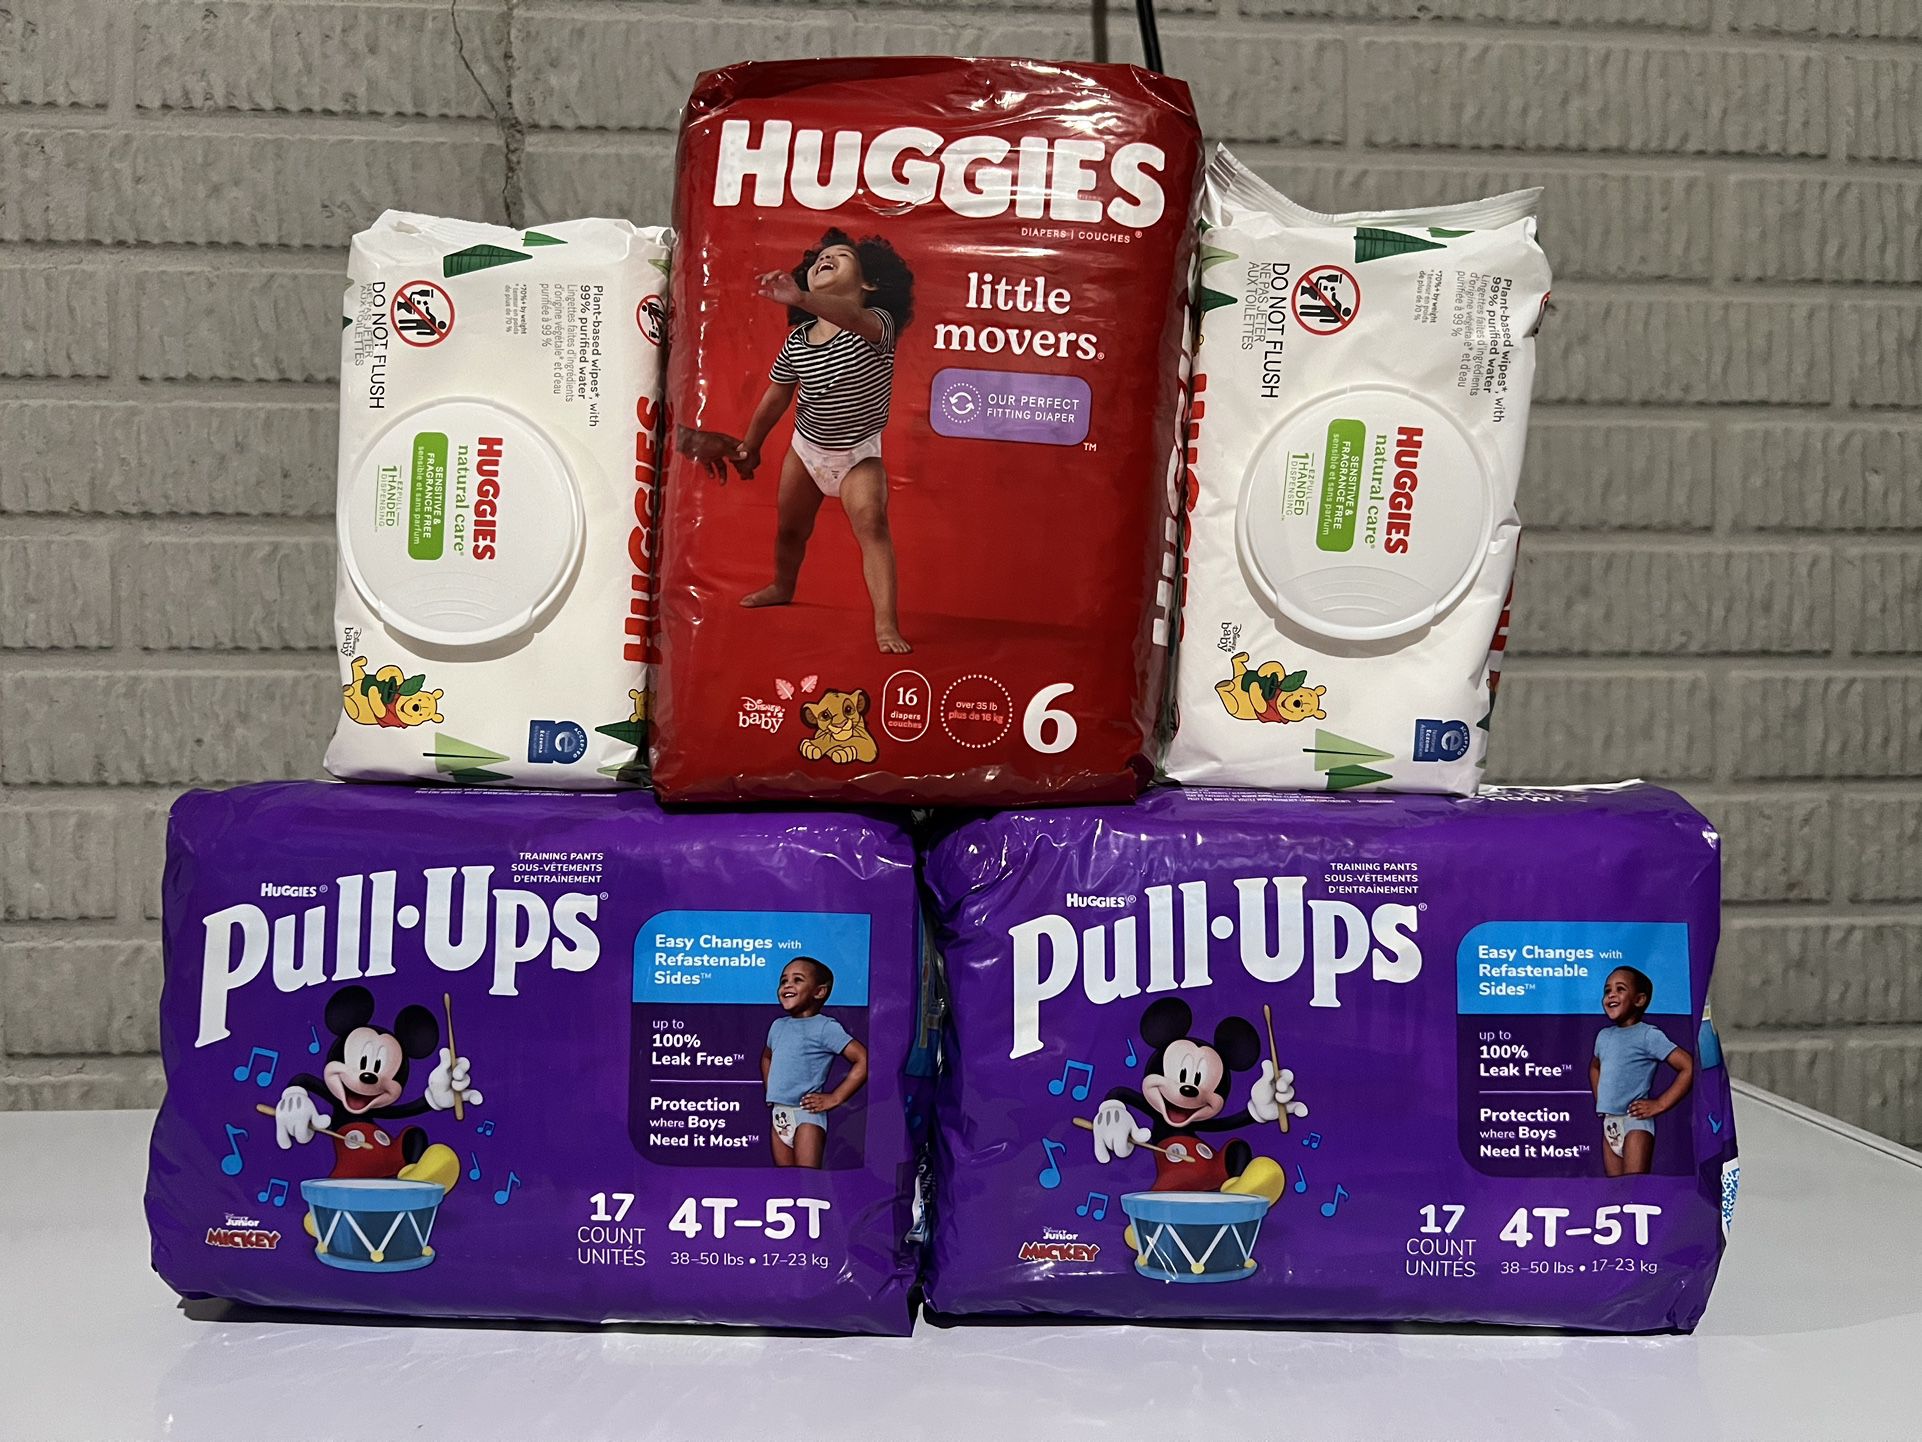 New Unopened Huggies Pull Up And Little Movers Baby Diapers And Wipe Bundle 